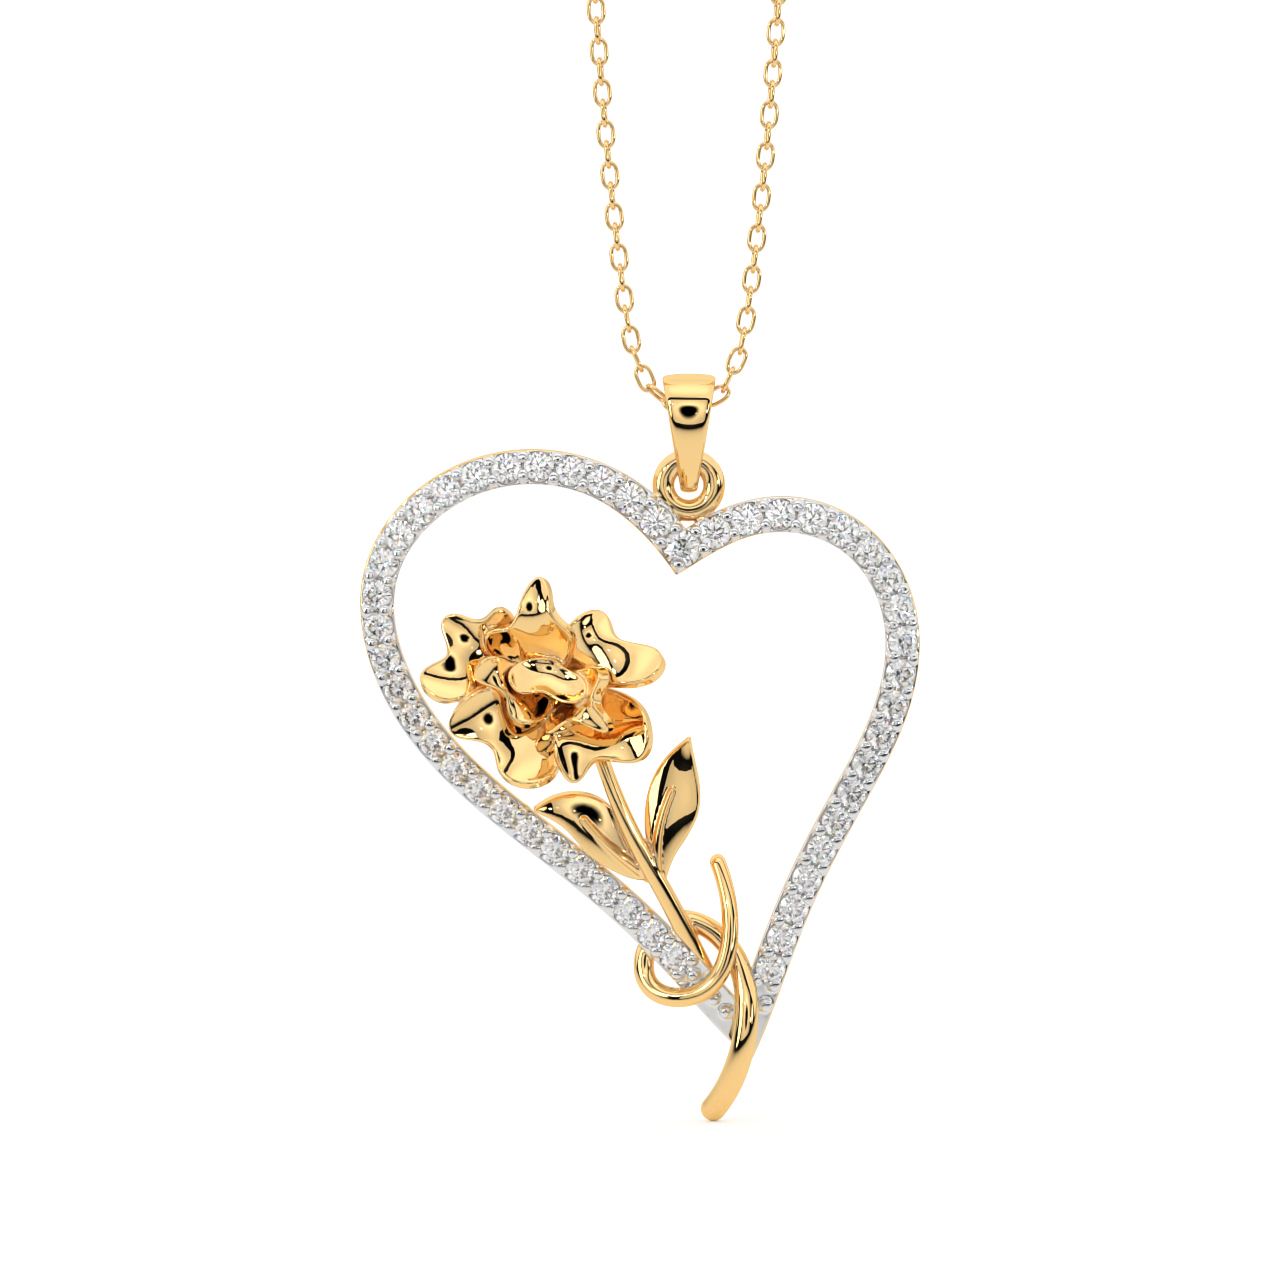 The Rose in Heart Shaped Pendant